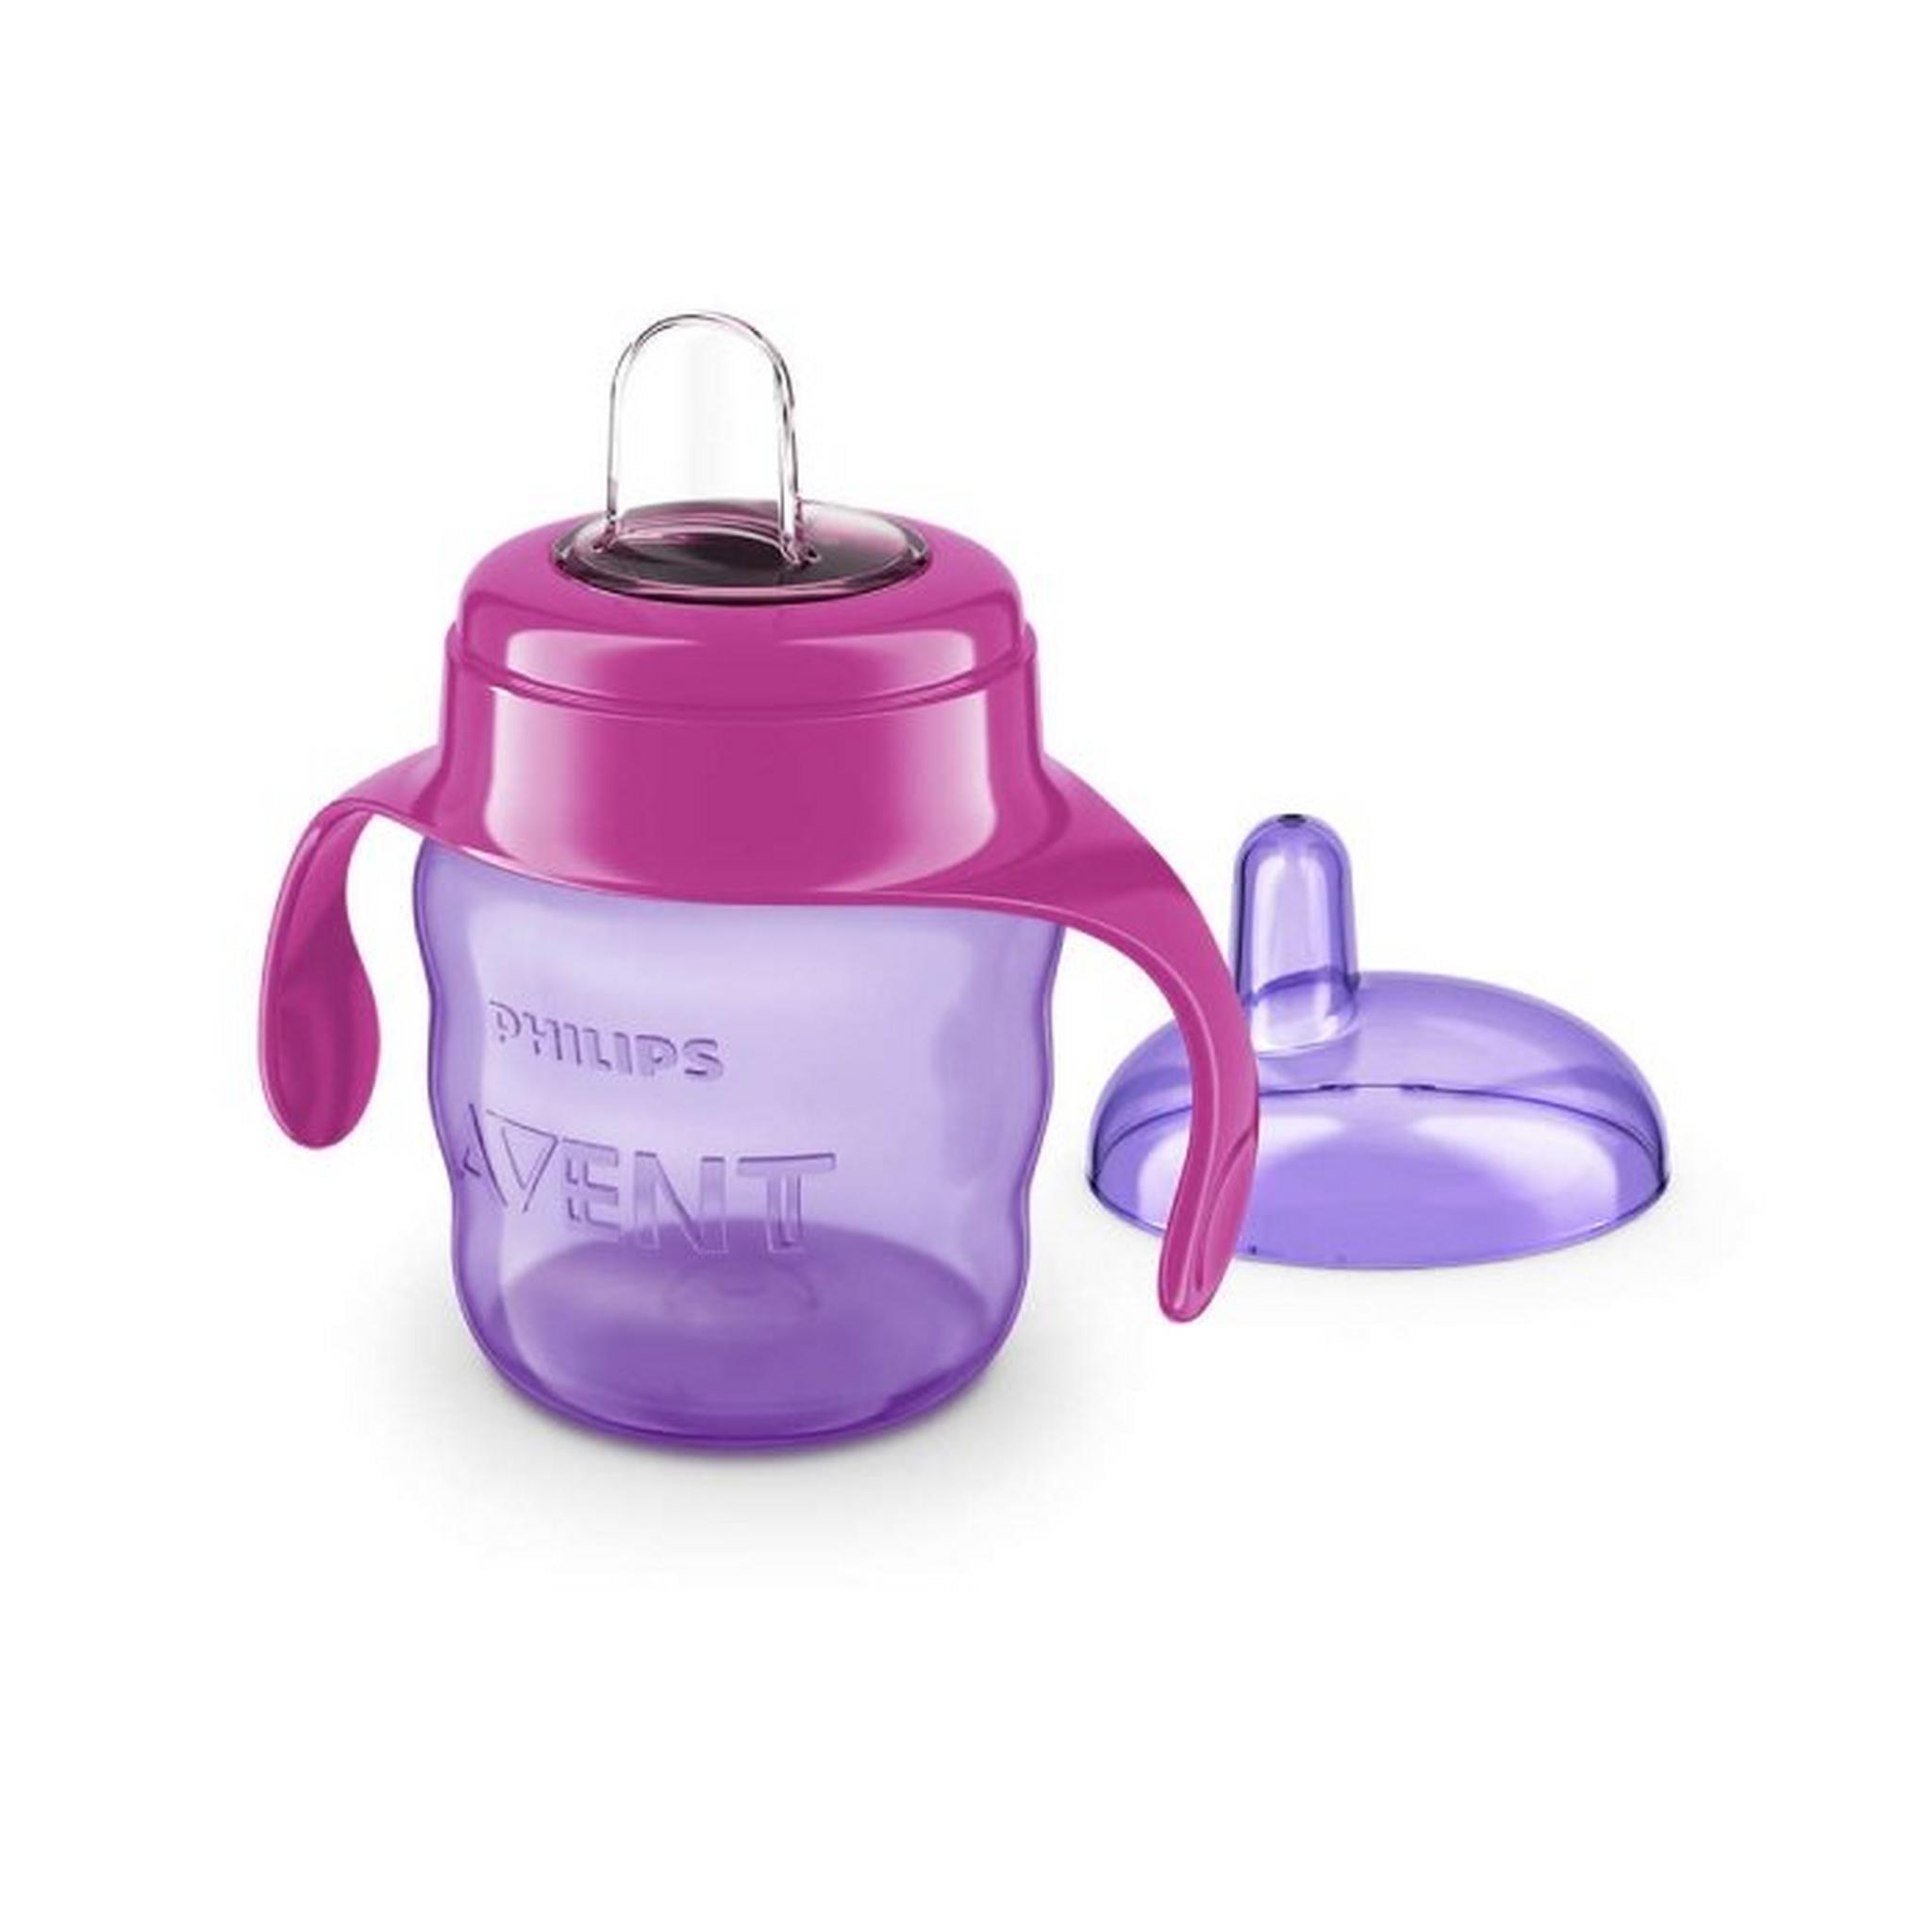 Philips Avent Classic Spout Cup 200ml Girl – 1 Piece